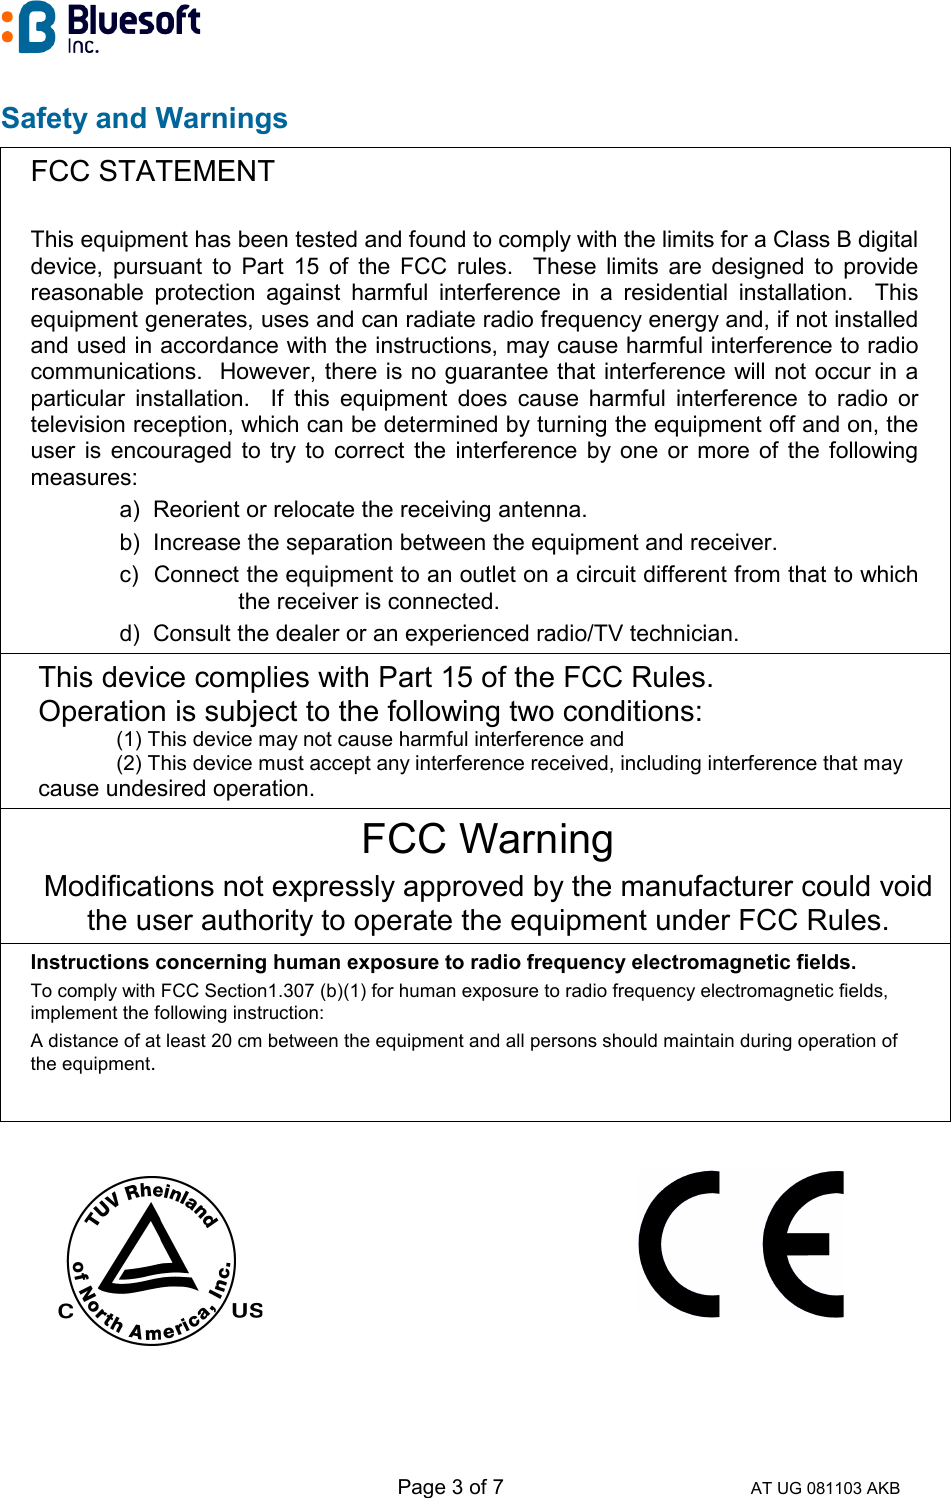   Page 3 of 7 AT UG 081103 AKB Safety and Warnings  FCC STATEMENT  This equipment has been tested and found to comply with the limits for a Class B digital device, pursuant to Part 15 of the FCC rules.  These limits are designed to provide reasonable protection against harmful interference in a residential installation.  This equipment generates, uses and can radiate radio frequency energy and, if not installed and used in accordance with the instructions, may cause harmful interference to radio communications.  However, there is no guarantee that interference will not occur in a particular installation.  If this equipment does cause harmful interference to radio or television reception, which can be determined by turning the equipment off and on, the user is encouraged to try to correct the interference by one or more of the following measures: a)  Reorient or relocate the receiving antenna. b)  Increase the separation between the equipment and receiver. c)  Connect the equipment to an outlet on a circuit different from that to which the receiver is connected. d)  Consult the dealer or an experienced radio/TV technician. This device complies with Part 15 of the FCC Rules.                  Operation is subject to the following two conditions:              (1) This device may not cause harmful interference and              (2) This device must accept any interference received, including interference that may        cause undesired operation. FCC Warning Modifications not expressly approved by the manufacturer could void the user authority to operate the equipment under FCC Rules. Instructions concerning human exposure to radio frequency electromagnetic fields. To comply with FCC Section1.307 (b)(1) for human exposure to radio frequency electromagnetic fields, implement the following instruction: A distance of at least 20 cm between the equipment and all persons should maintain during operation of the equipment.           